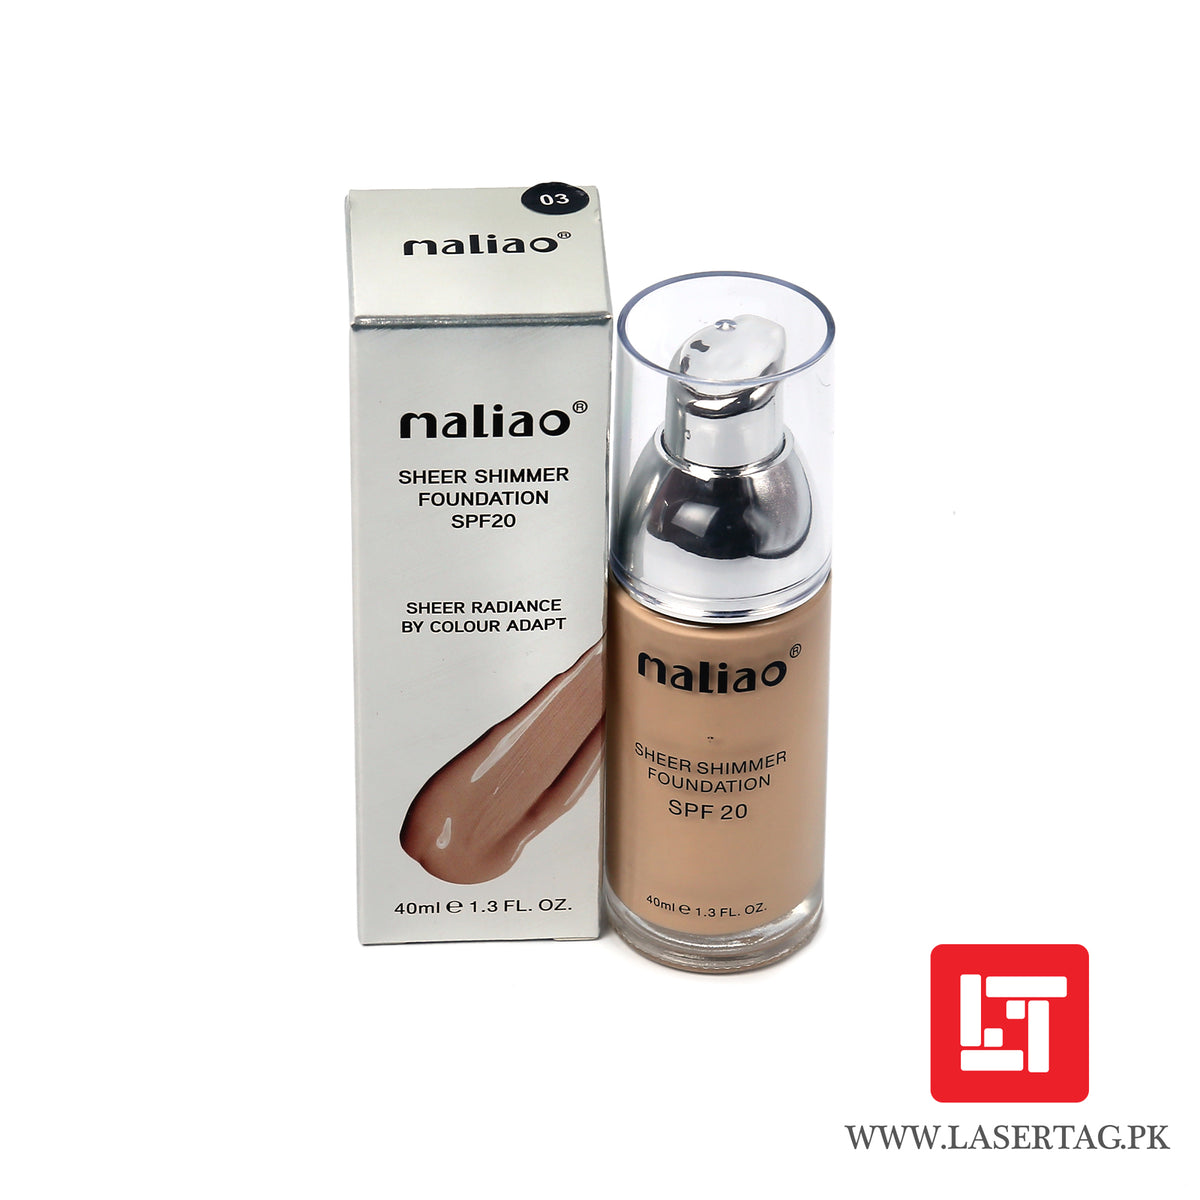 Maliao Sheer Shimmer Foundation 20 Sheer Radiance By Colour Adapt M28-03 40ml freeshipping - lasertag.pk